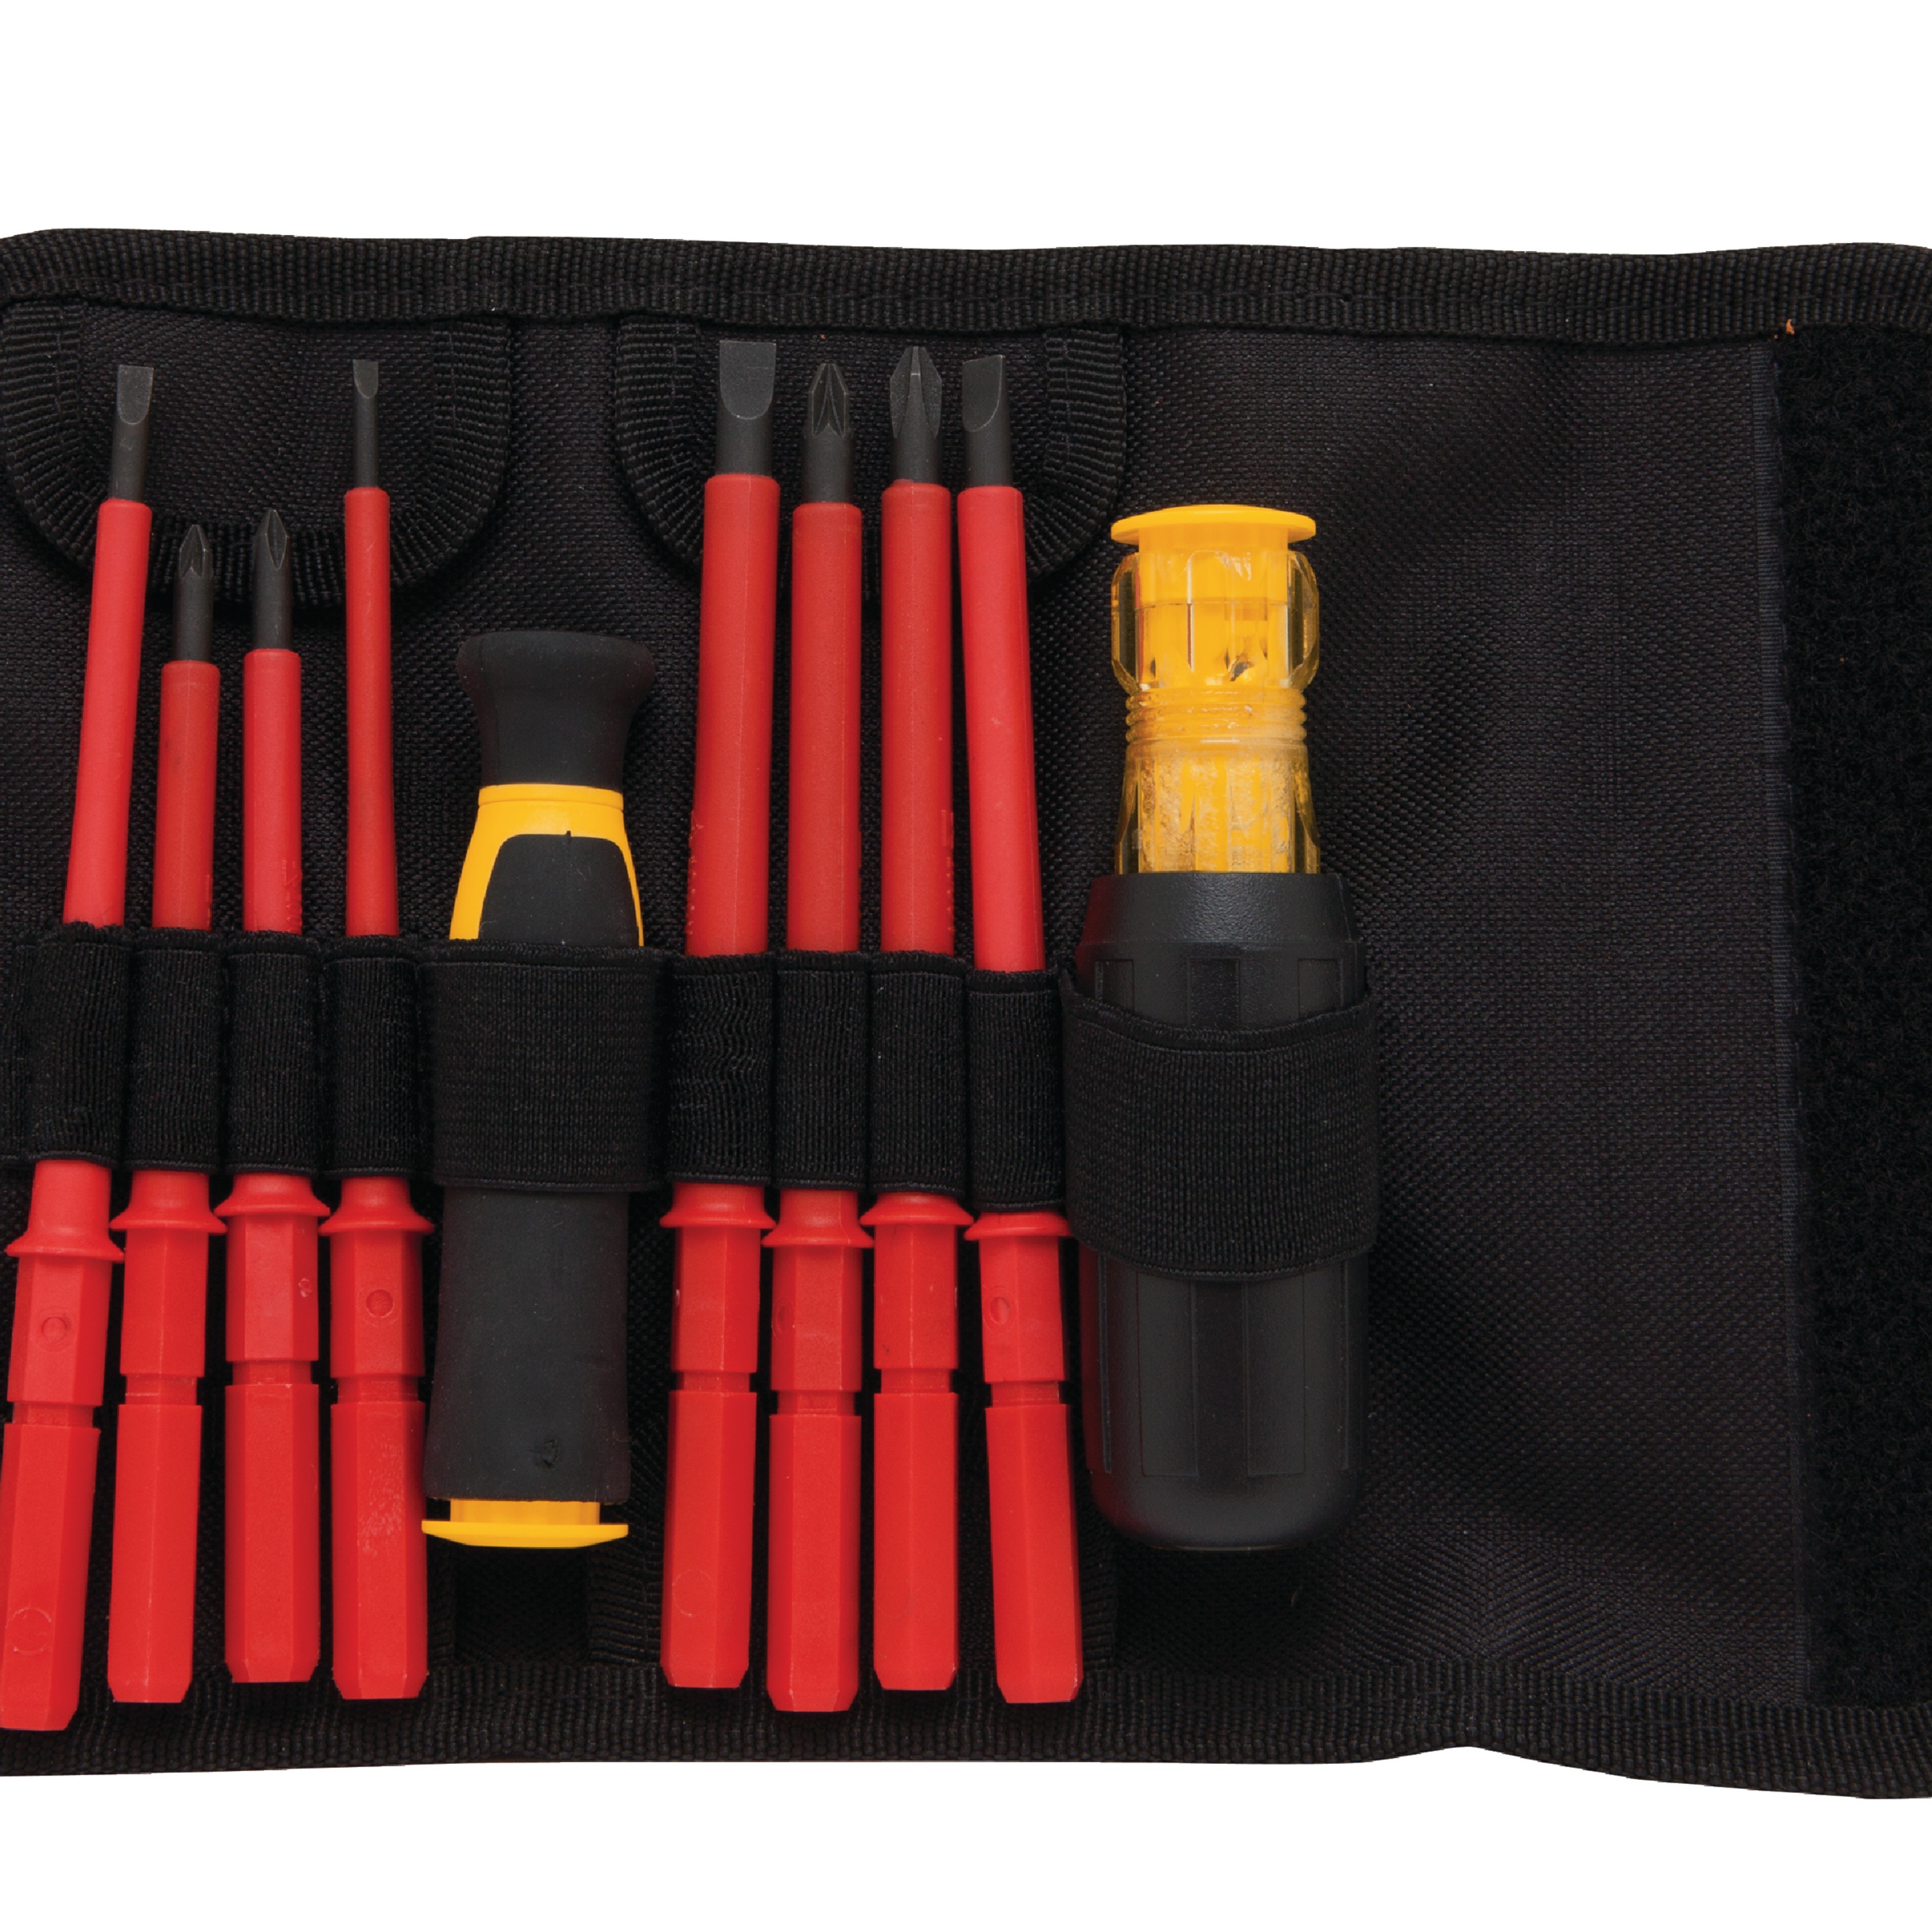 Insulated Vinyl Grip Screwdriver Set in tool pouch.